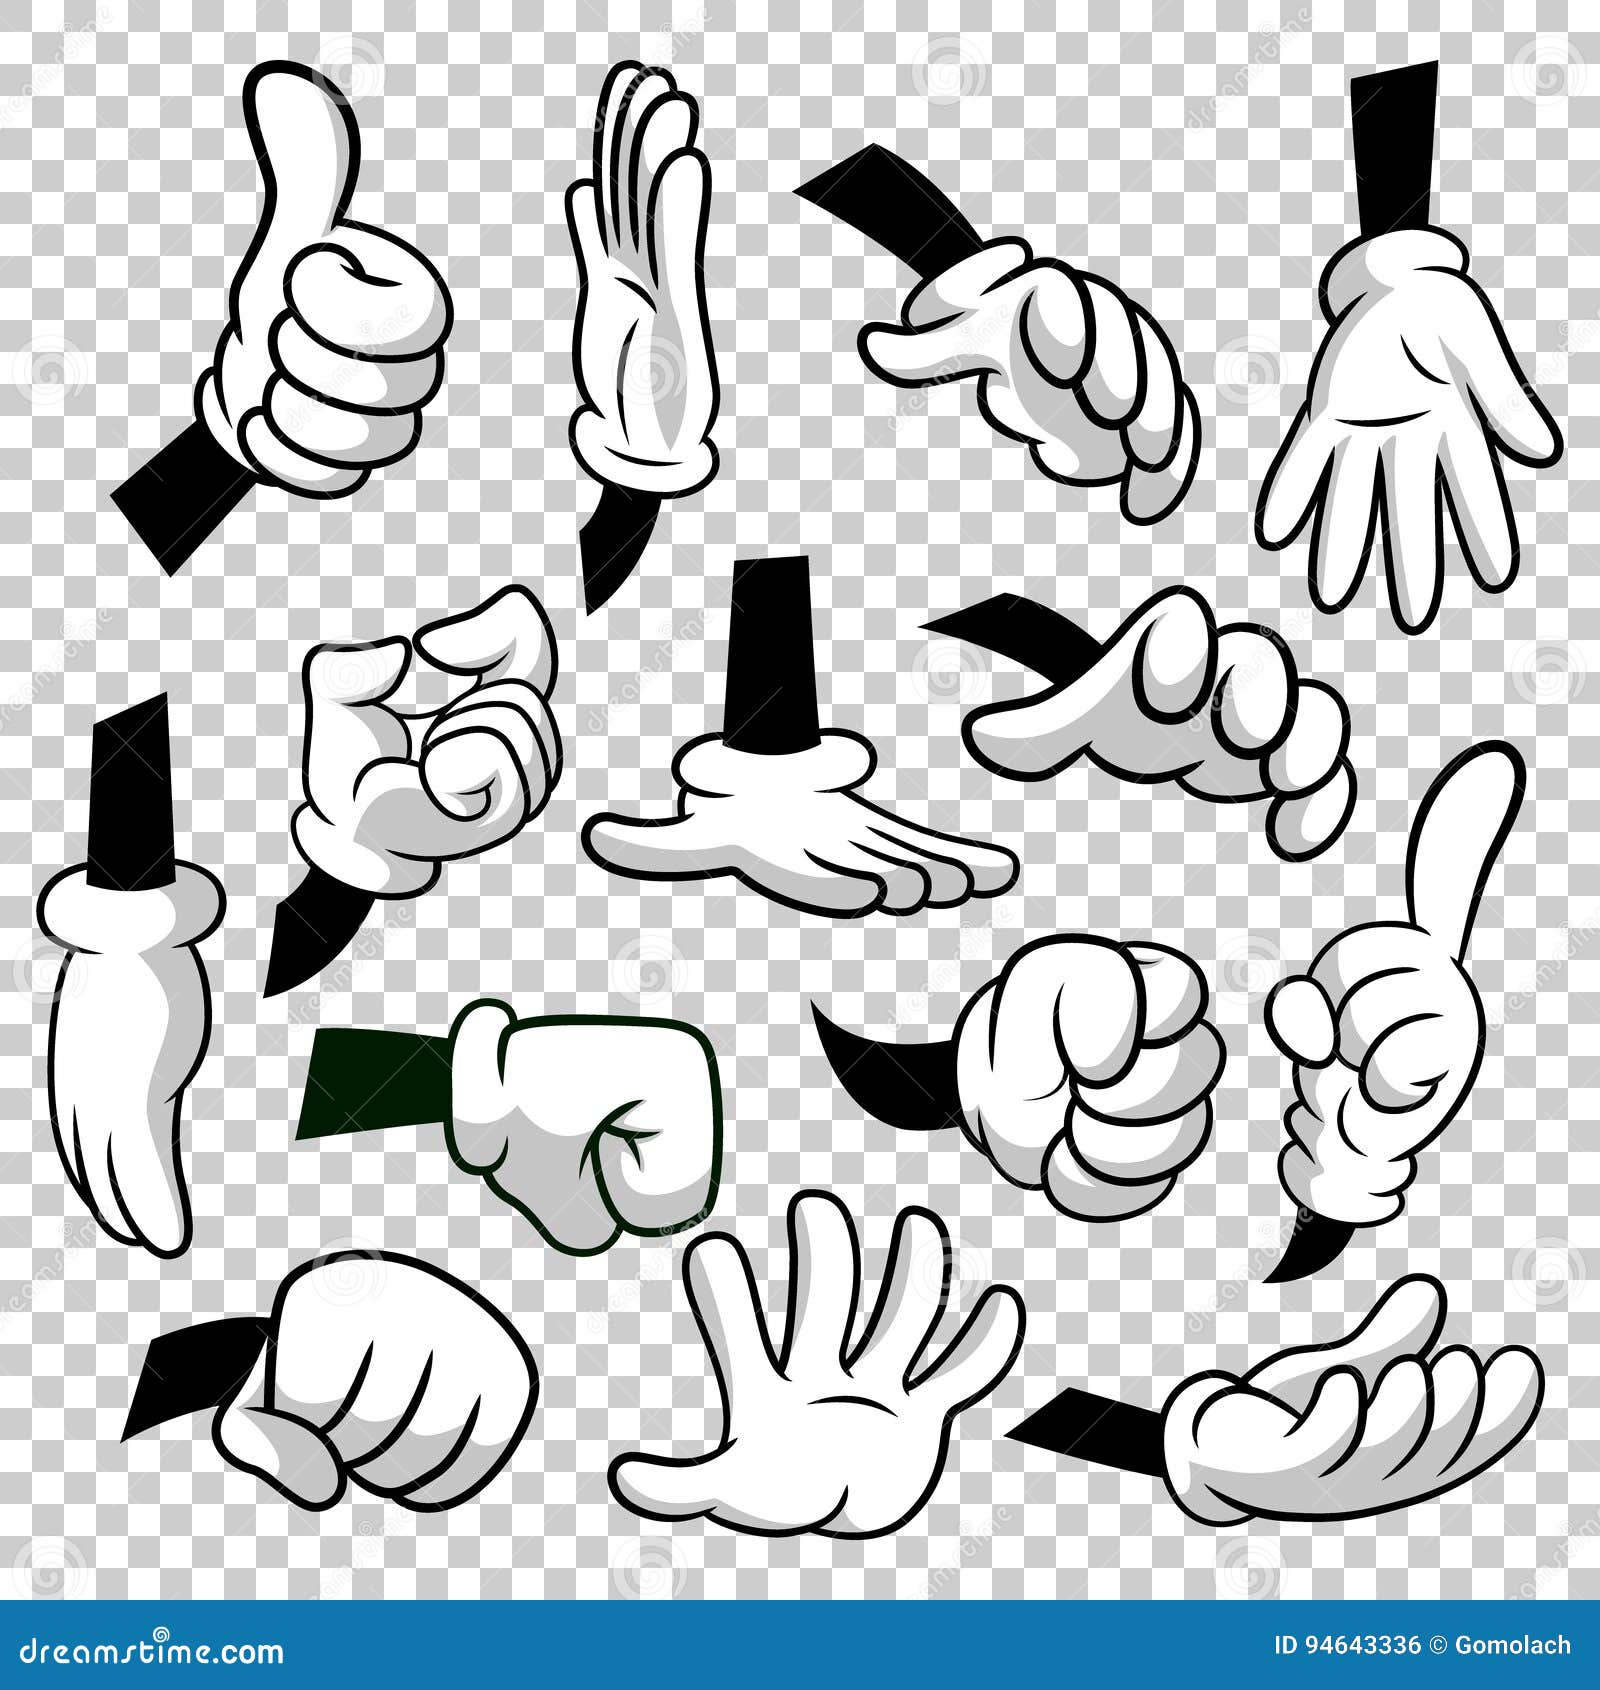 Cartoon Hands with Gloves Icon Set Isolated on Transparent Background.  Vector Clipart - Parts of Body, Arms in White Stock Vector - Illustration  of character, object: 94643336